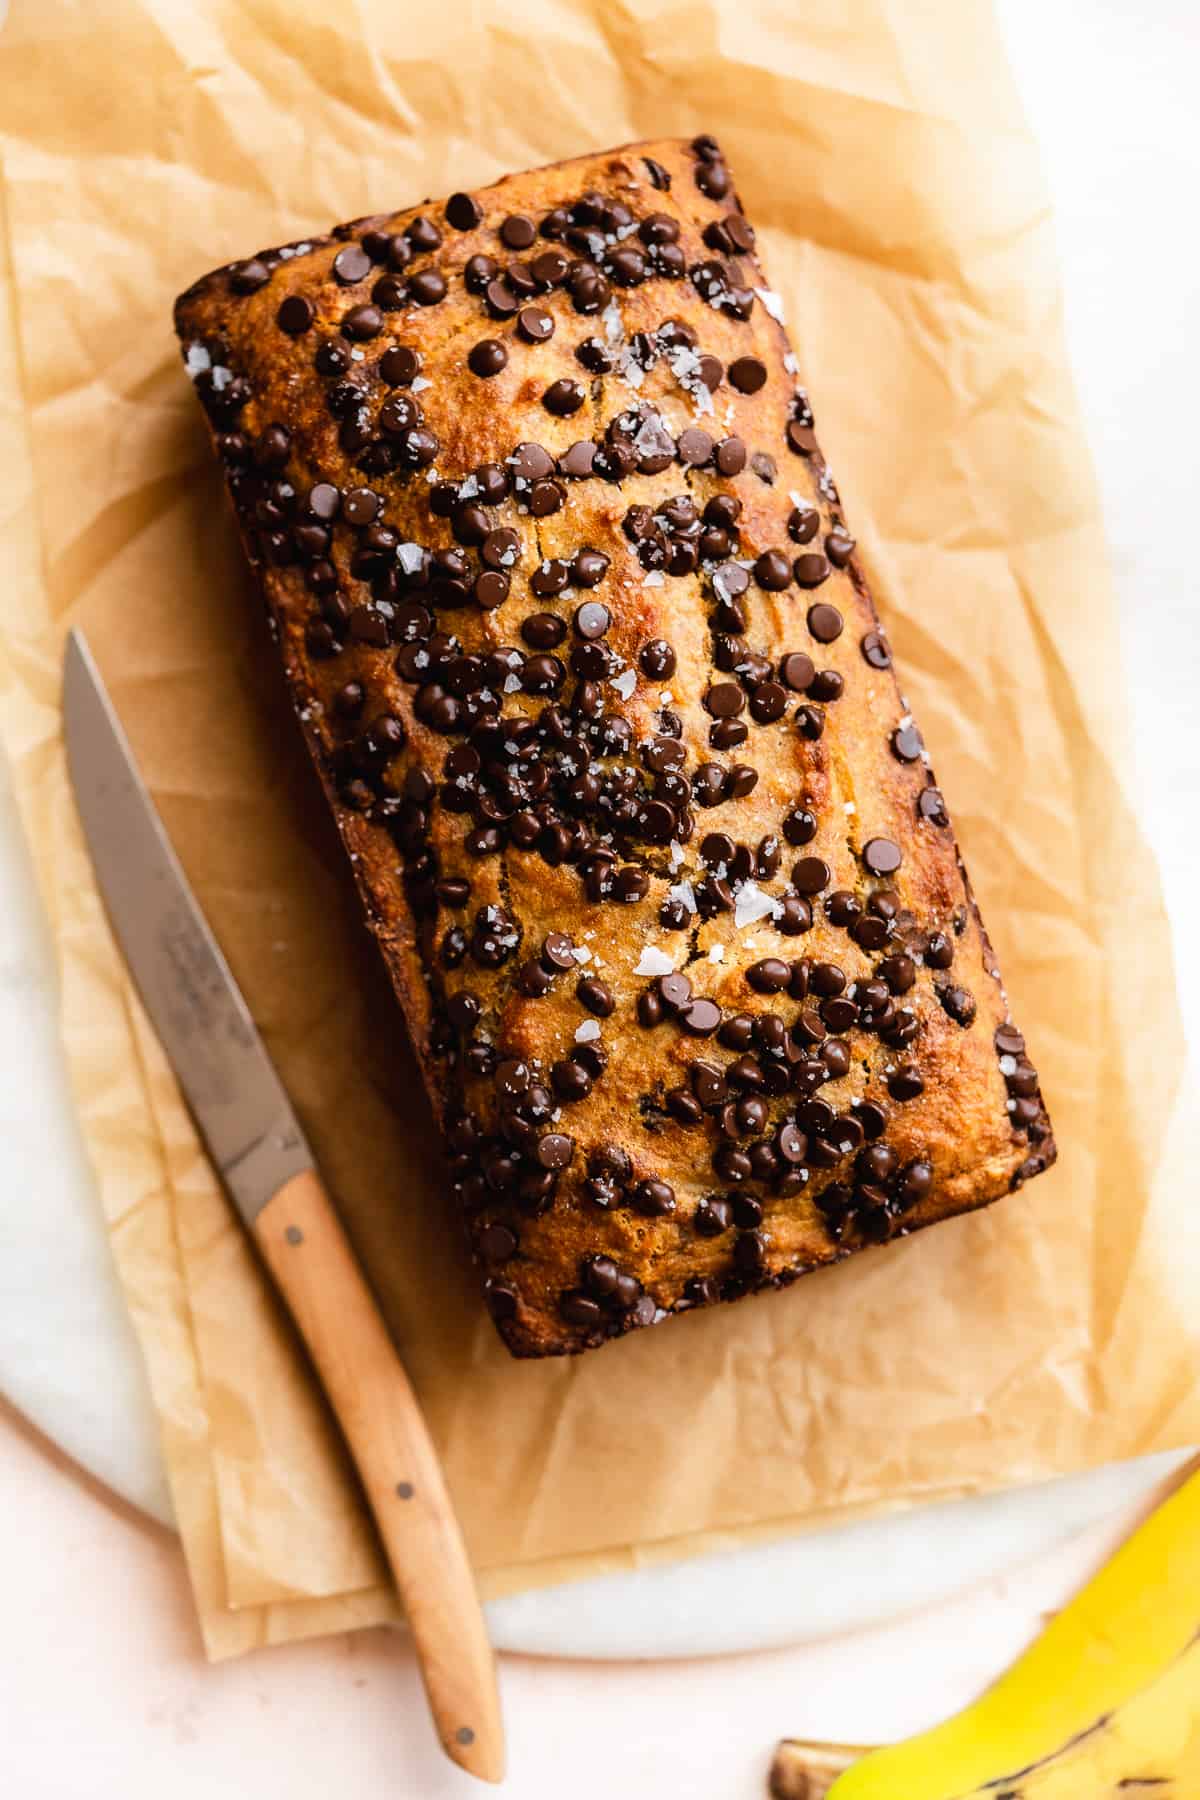 Chocolate chip bread sitting on brown paper with a knife to the side.